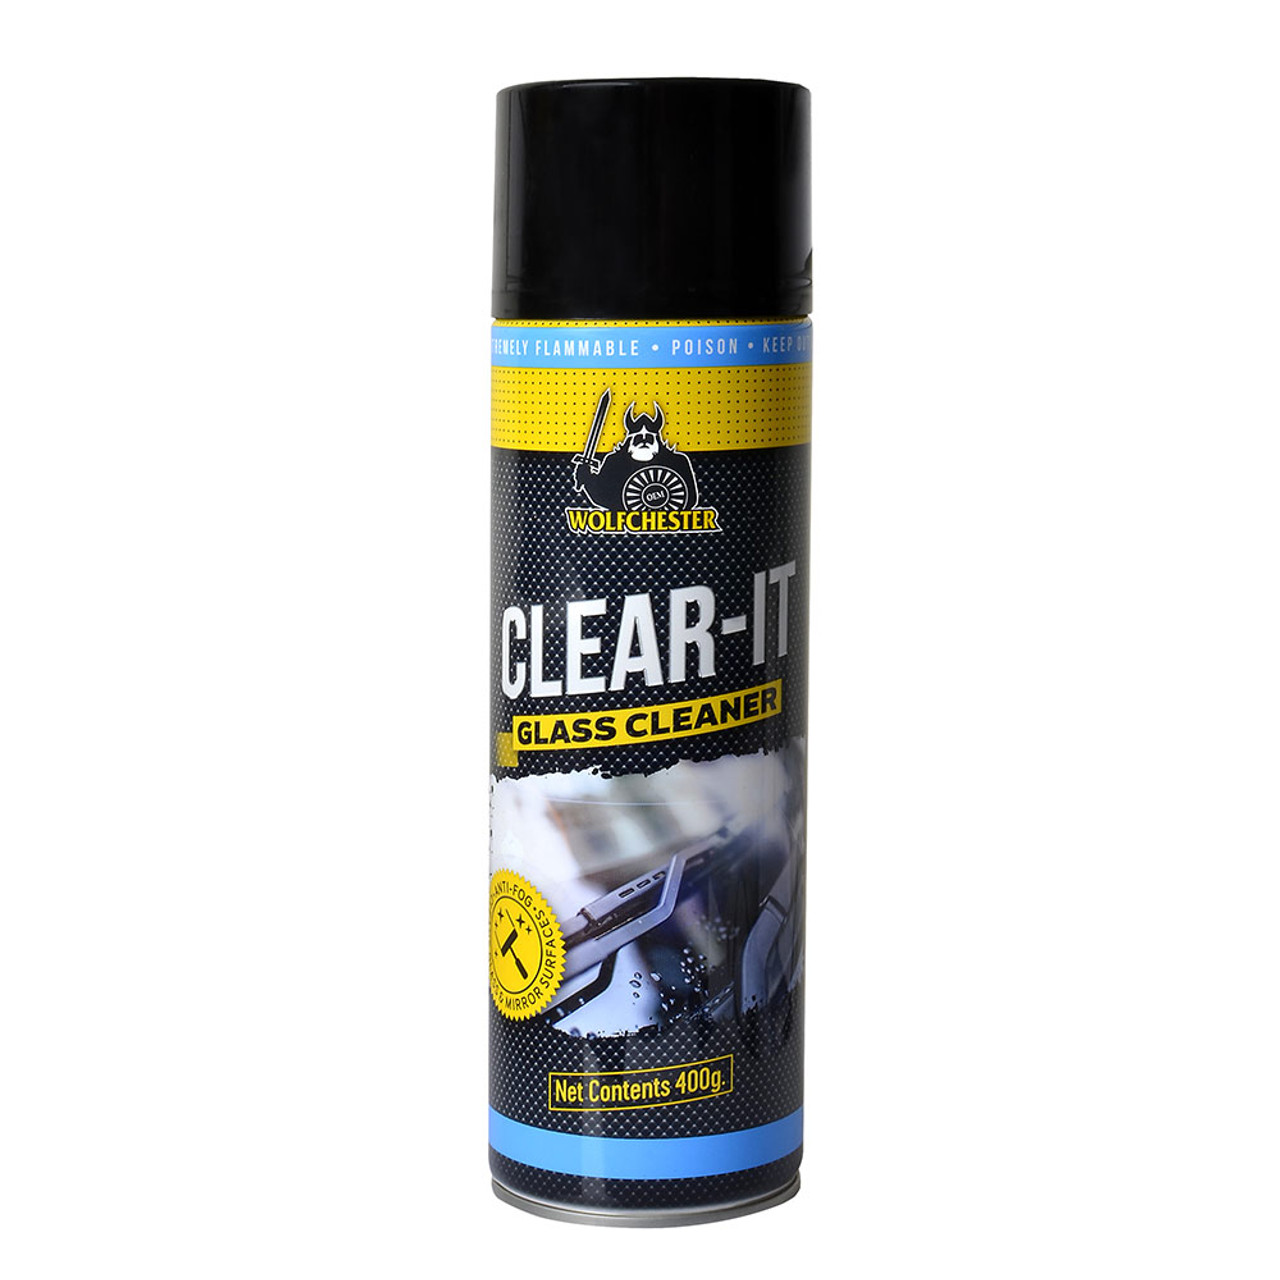 C-Clear Glass Cleaner, Glass Cleaners